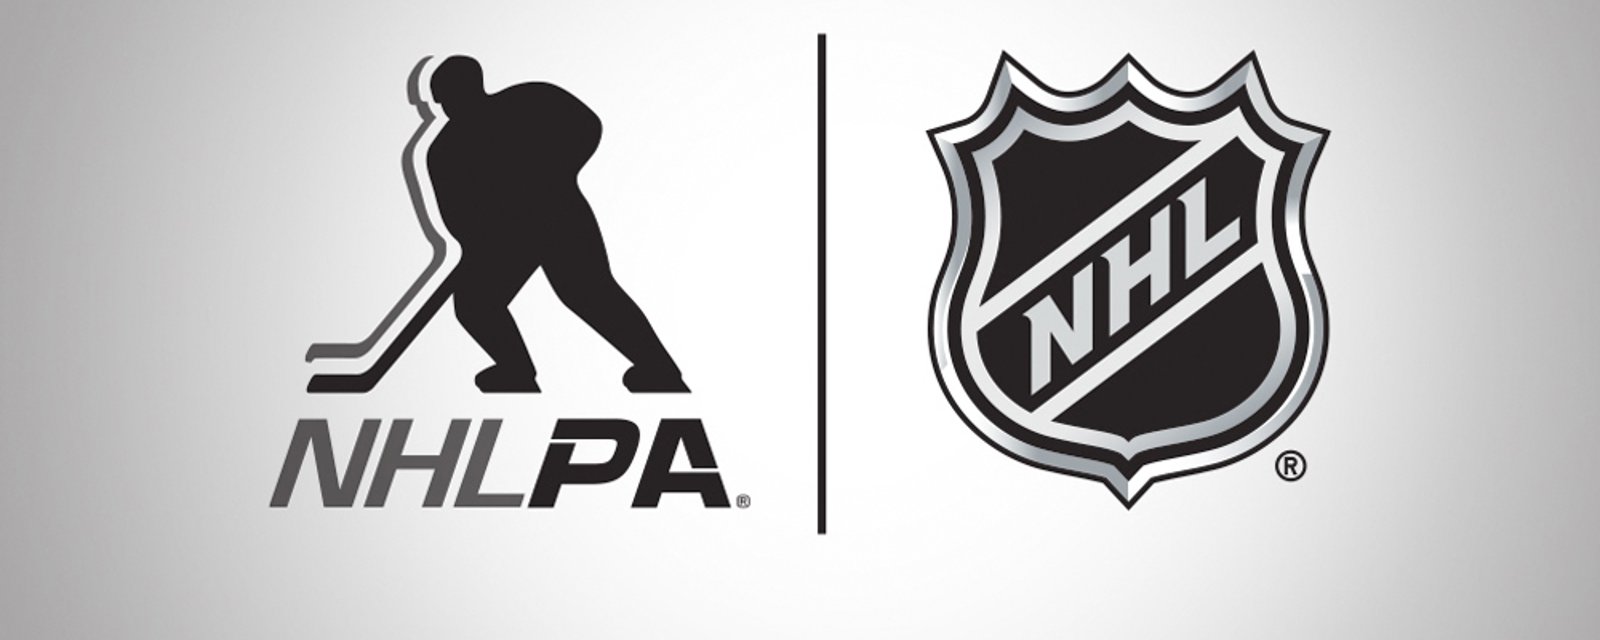 Breaking: NHL and NHLPA agree on new CBA